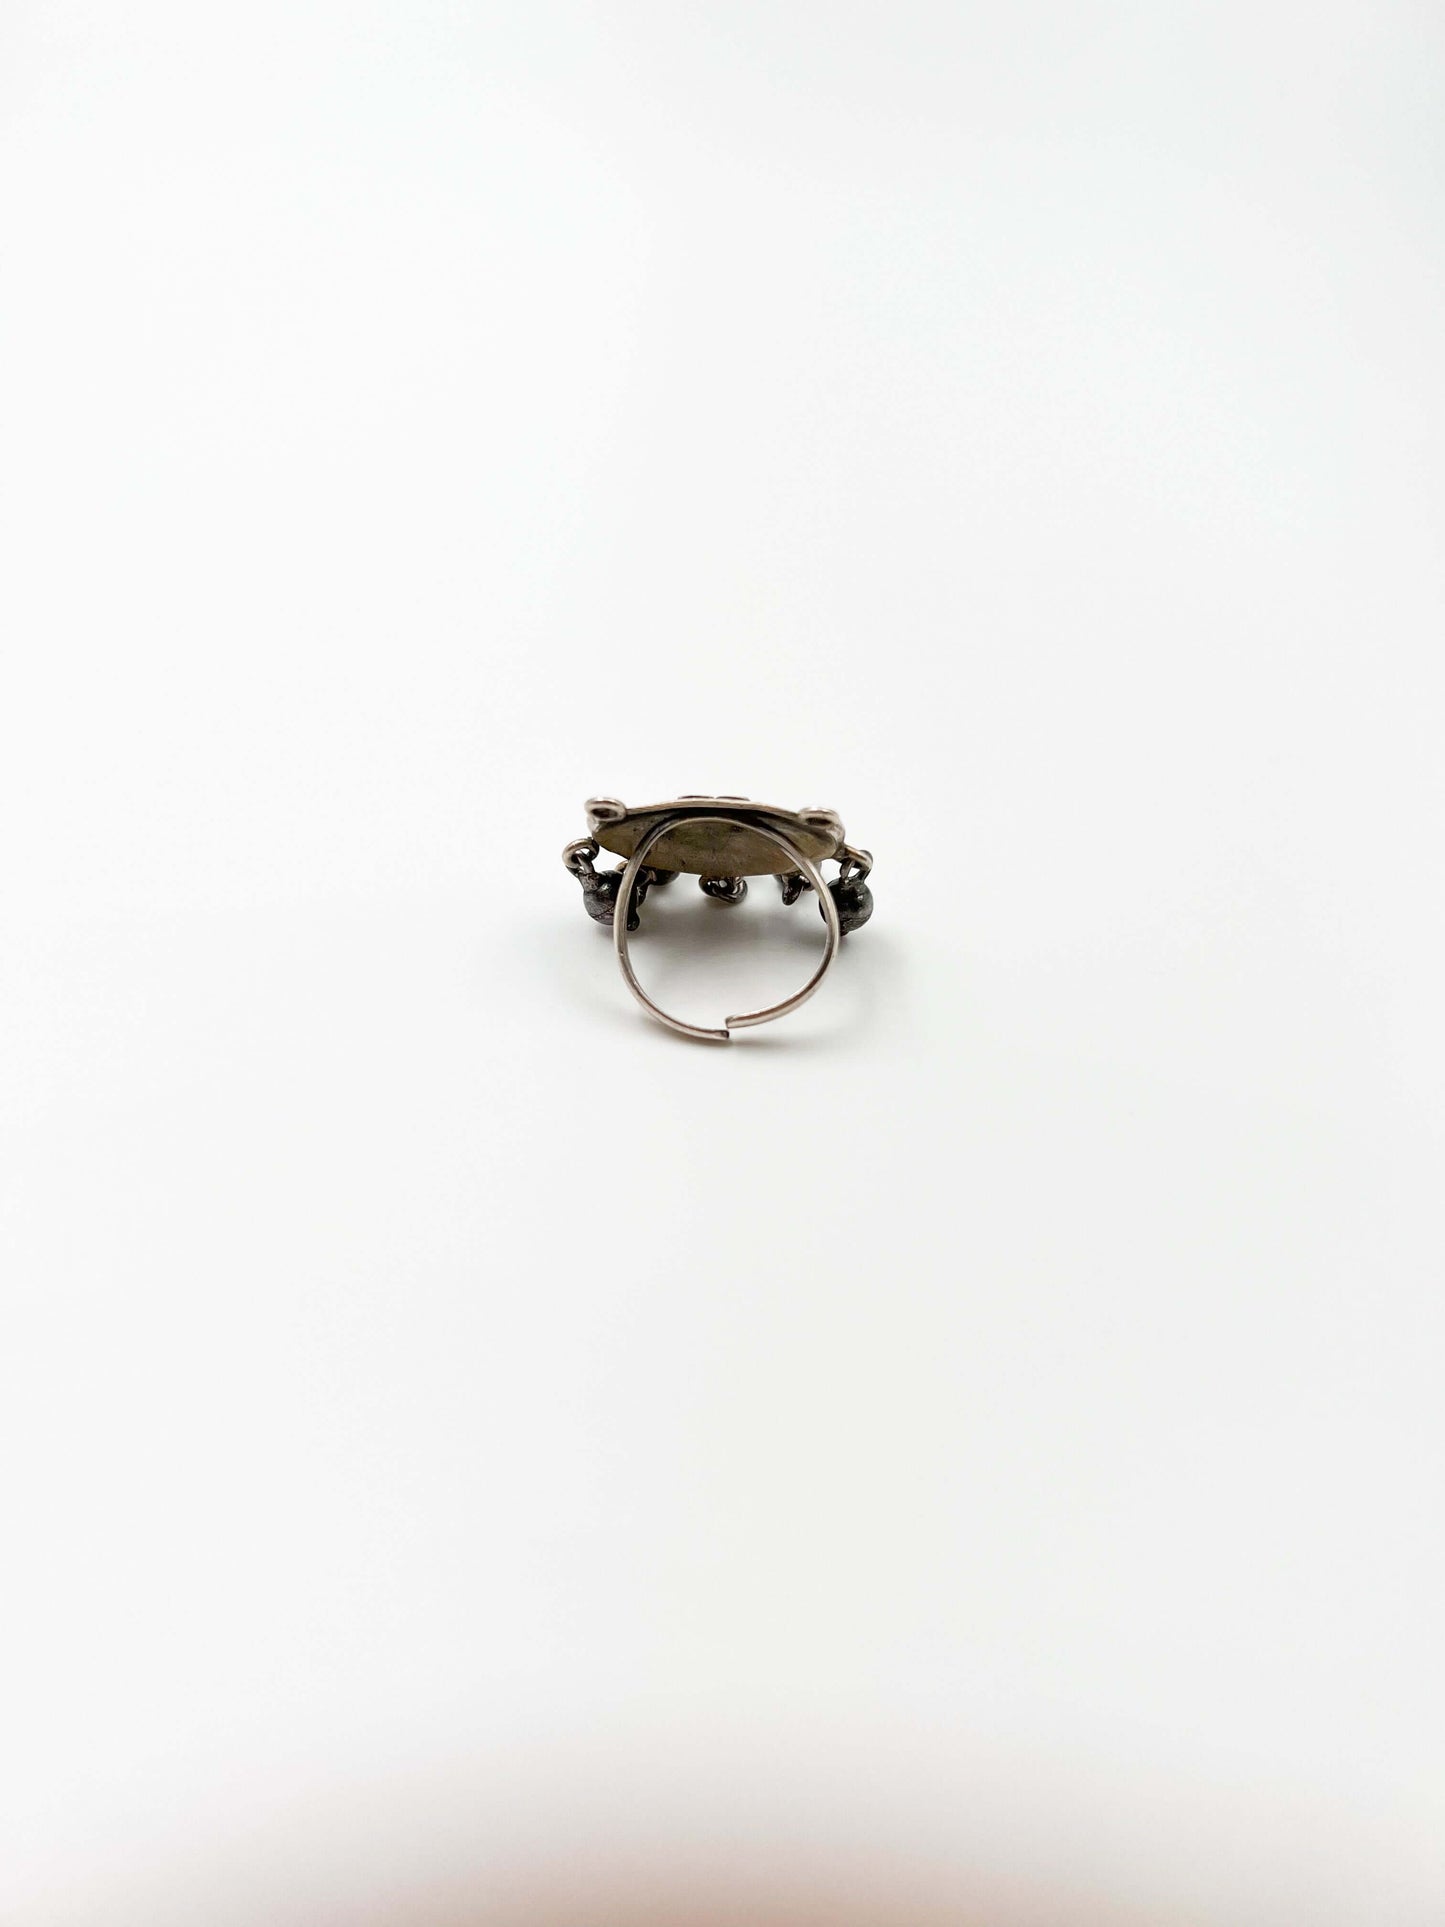 Ardha oxidised silver ring with ghunghroo